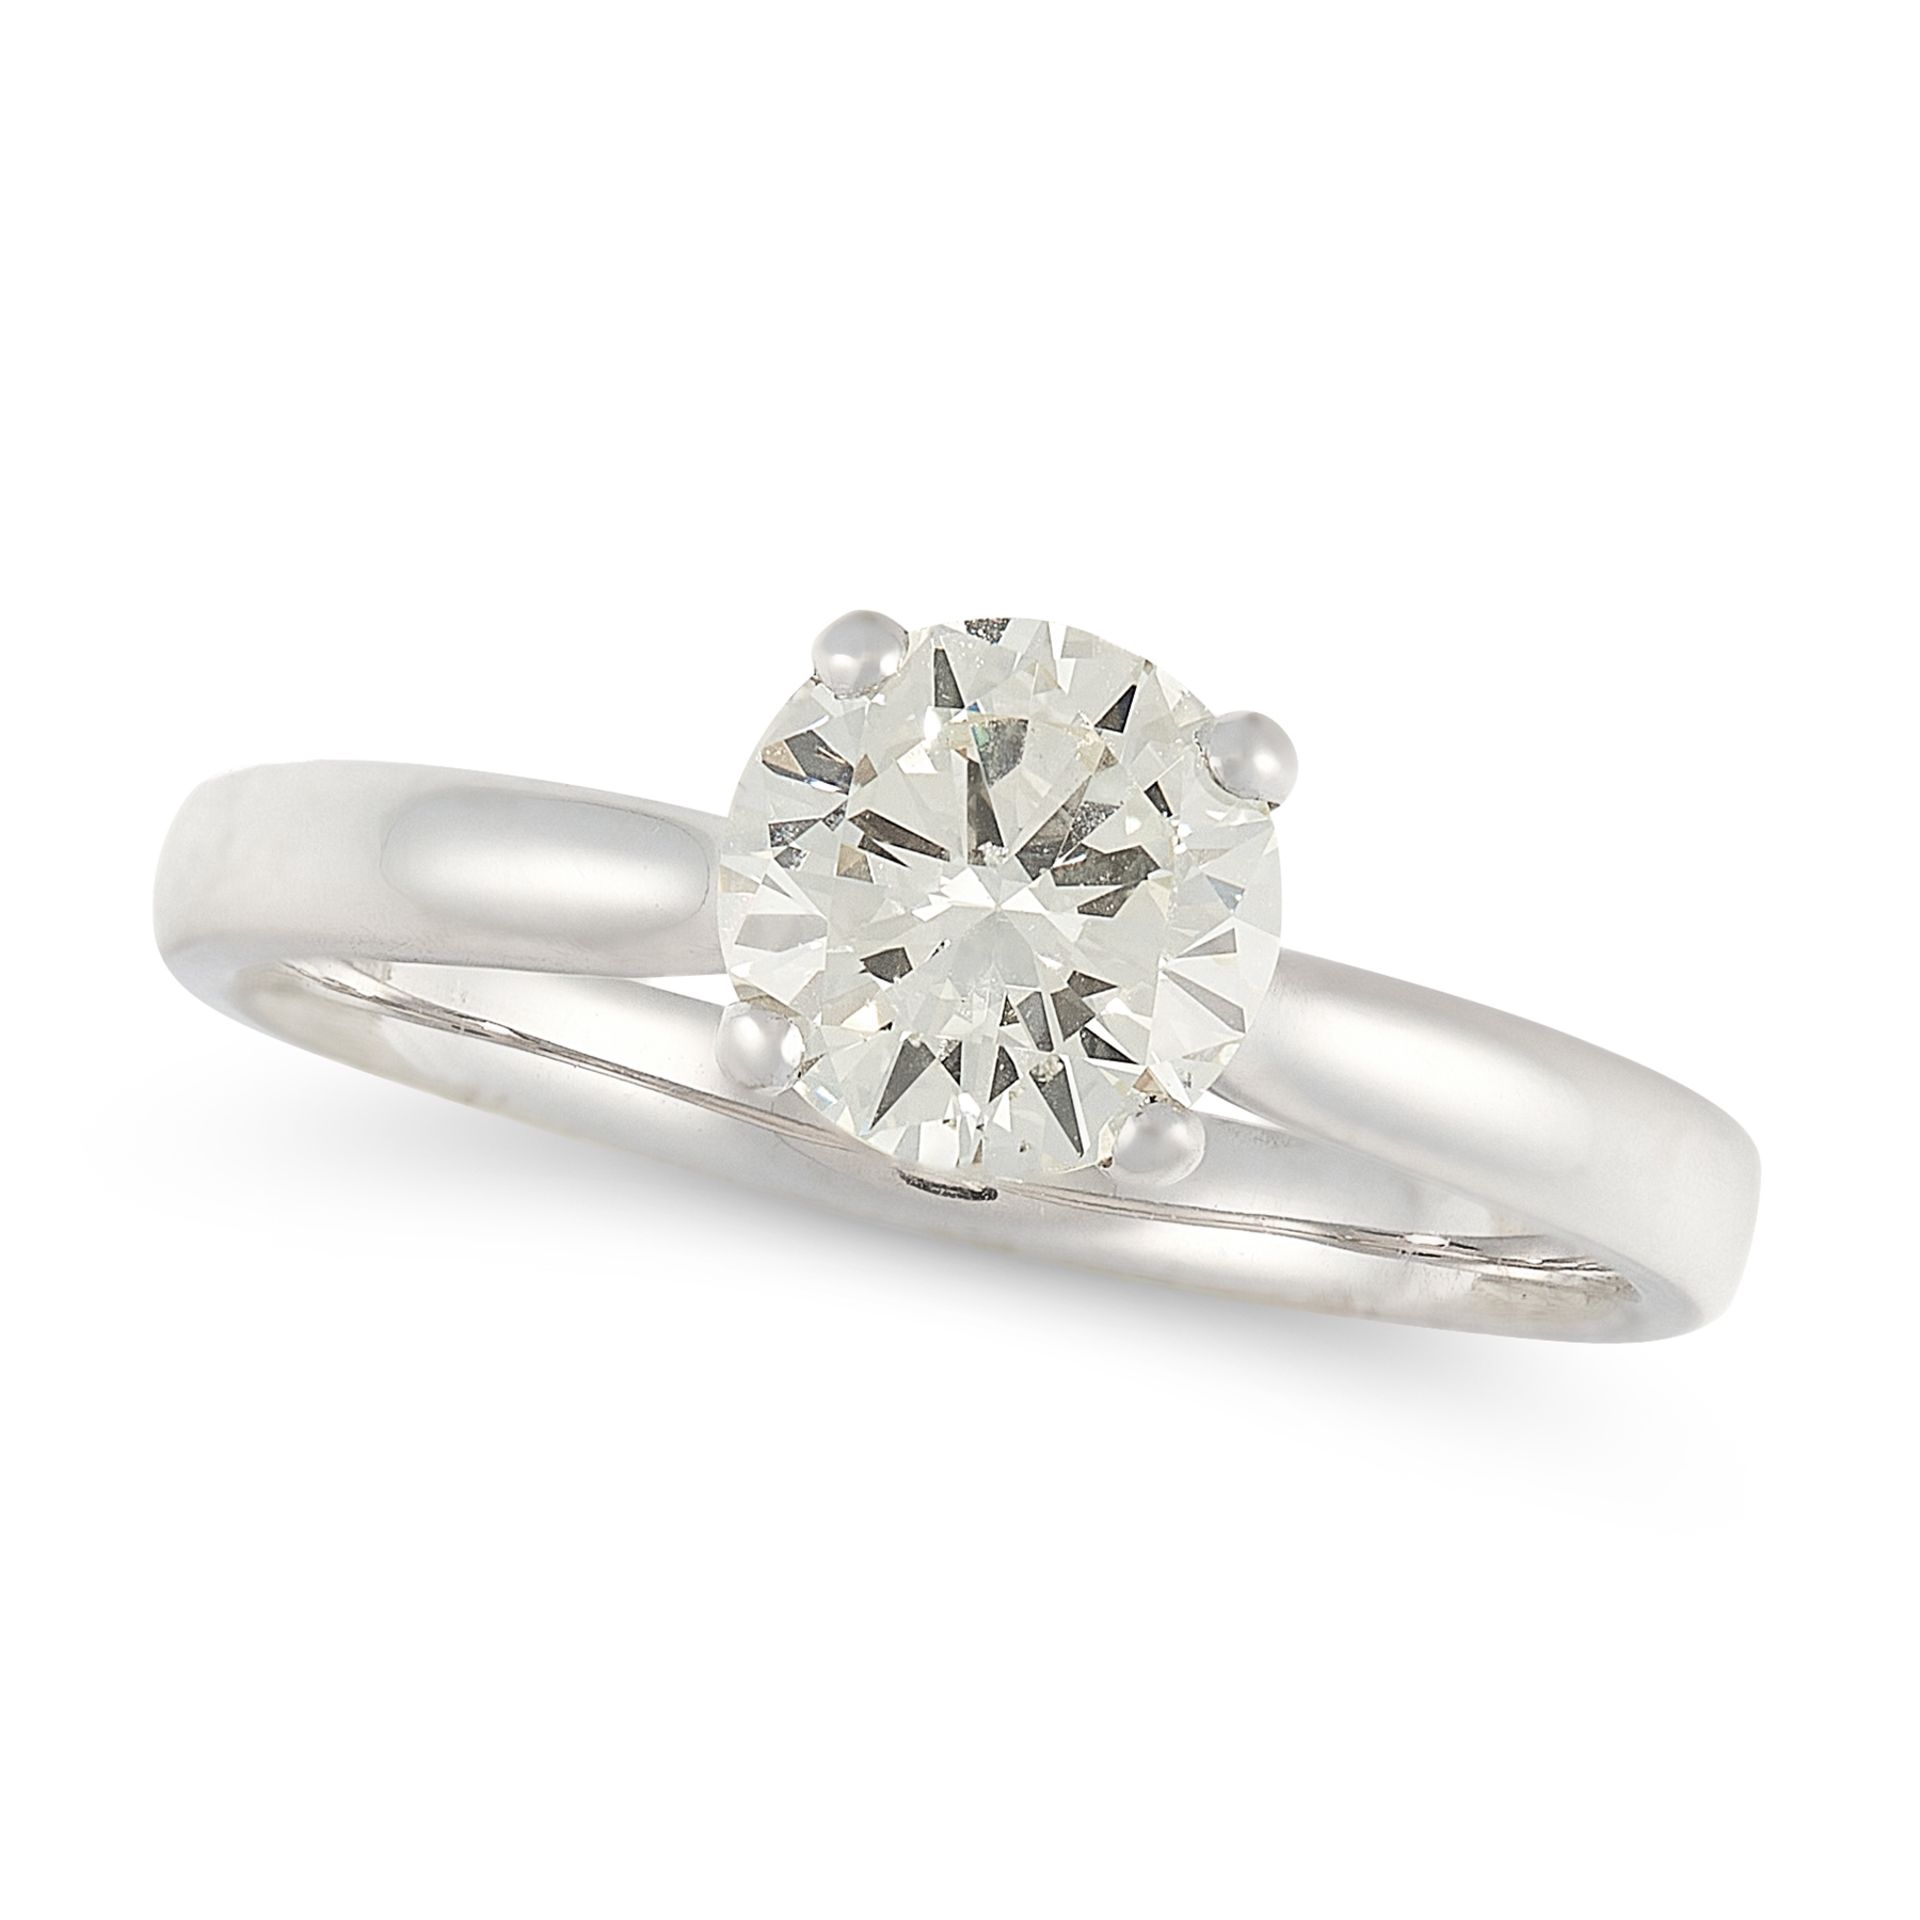 A SOLITAIRE DIAMOND ENGAGEMENT RING in 18ct white gold, set with a round cut diamond of 1.02 carats,